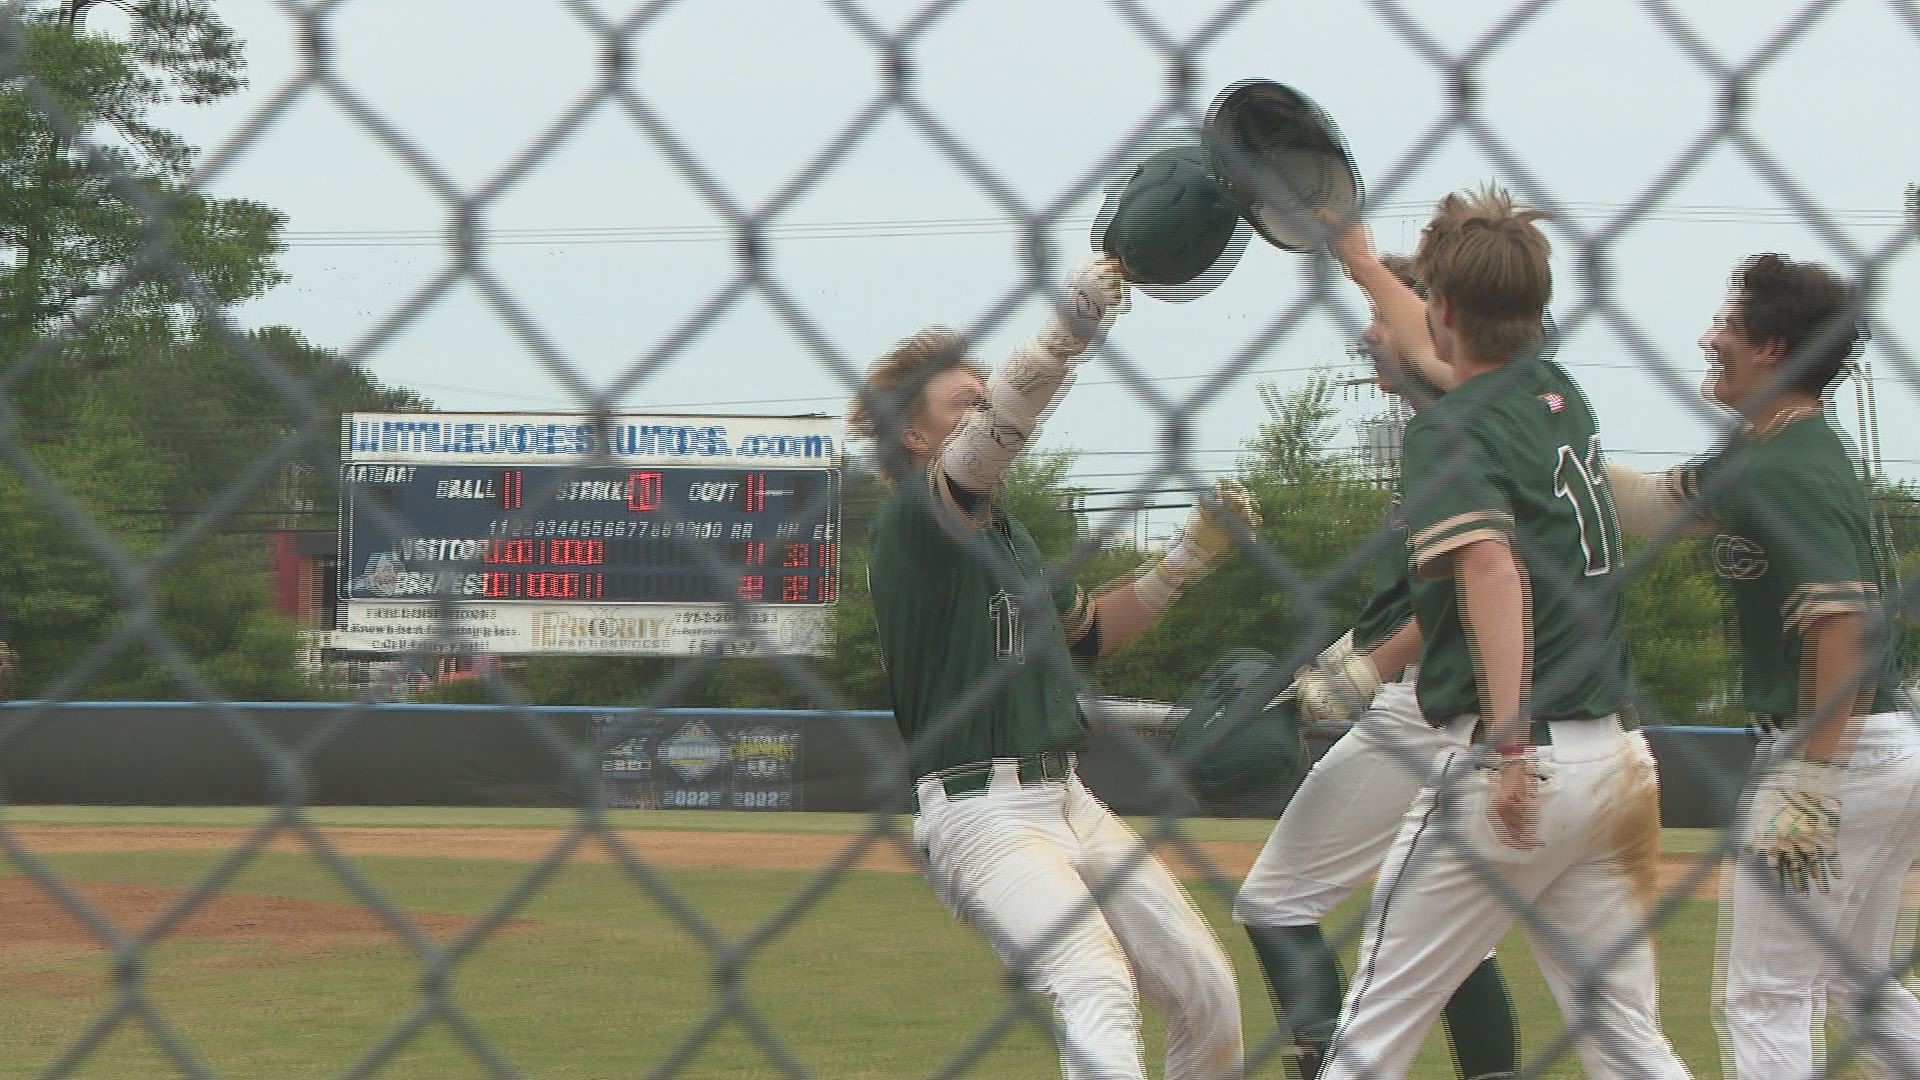 With the win, Cox advances to the Class 5 state tournament. The loss snapped an 11-game winning streak for the Hawks, who finished the season 14-8.